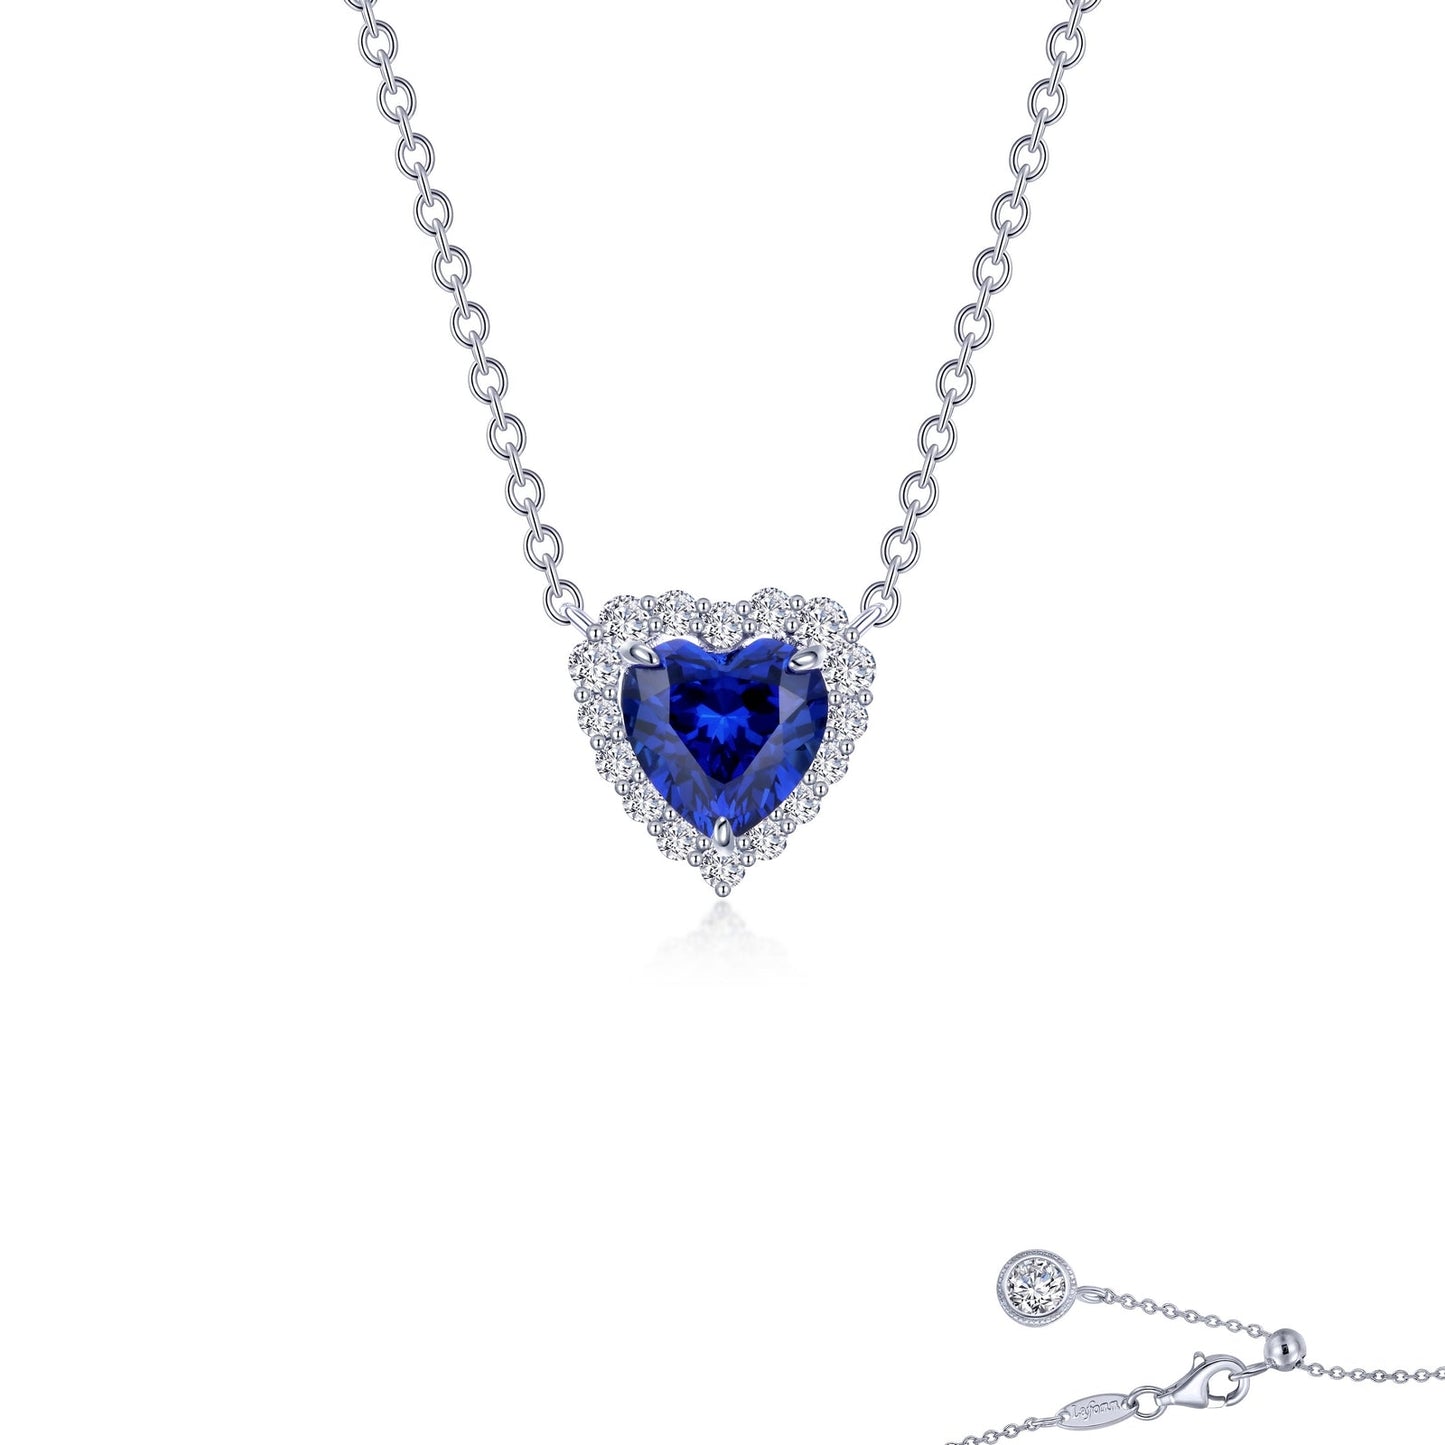 Lafonn Fancy Lab-Grown Sapphire Halo Heart Necklace Sapphire NECKLACES Platinum Appx CTW: 1.64 cts. CTS Approx. 10.5mm (H) x 10.5mm (W)